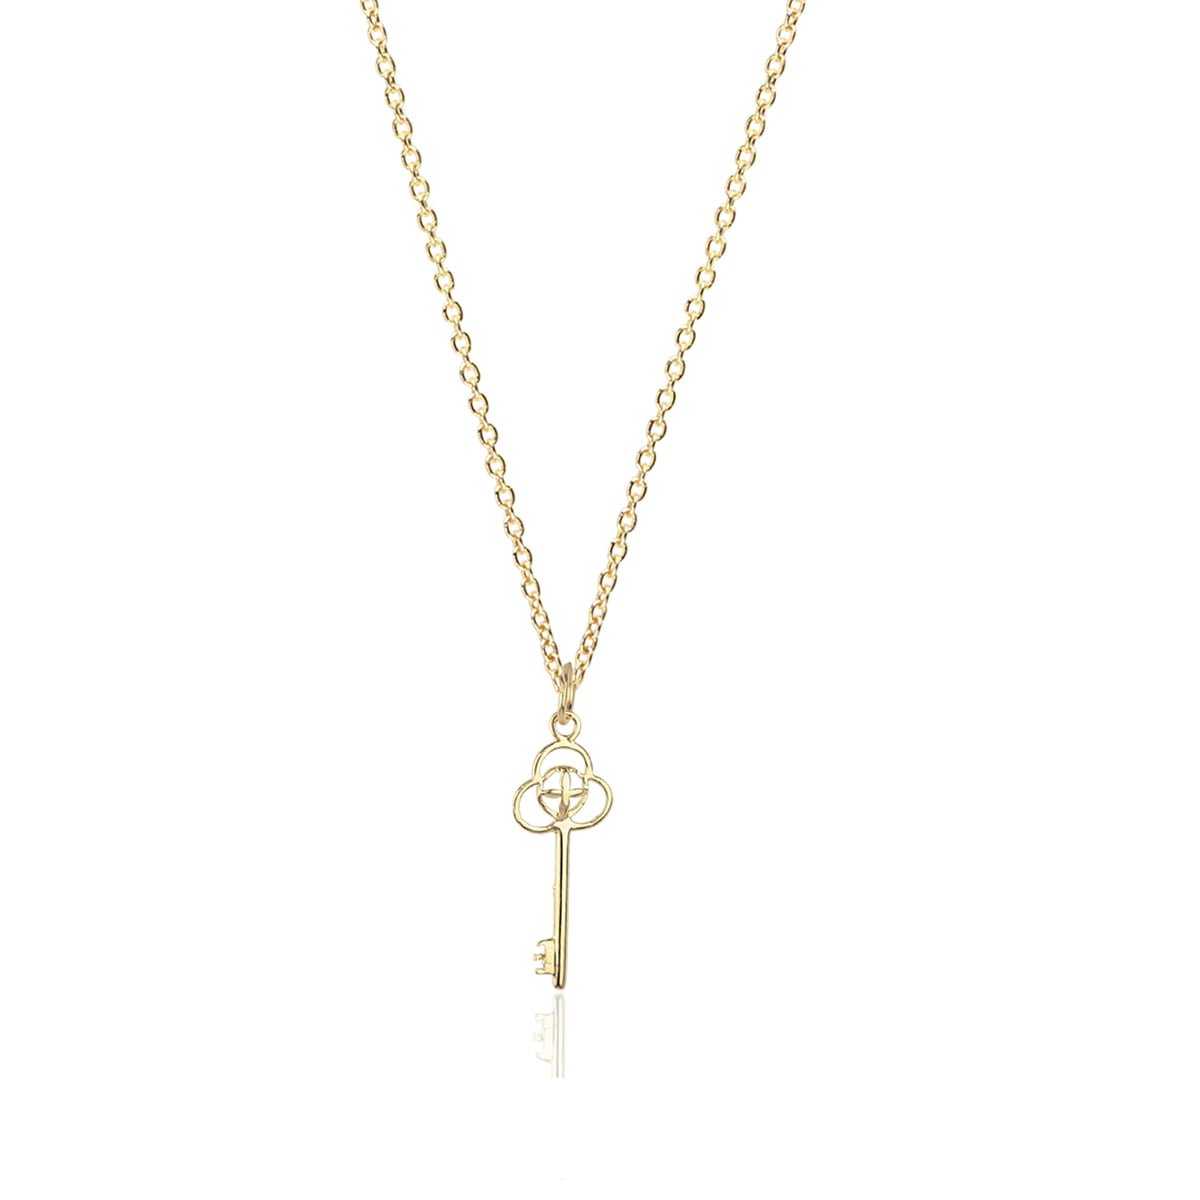 Noemi Key 18ct Gold Pendant Charm With A Chain